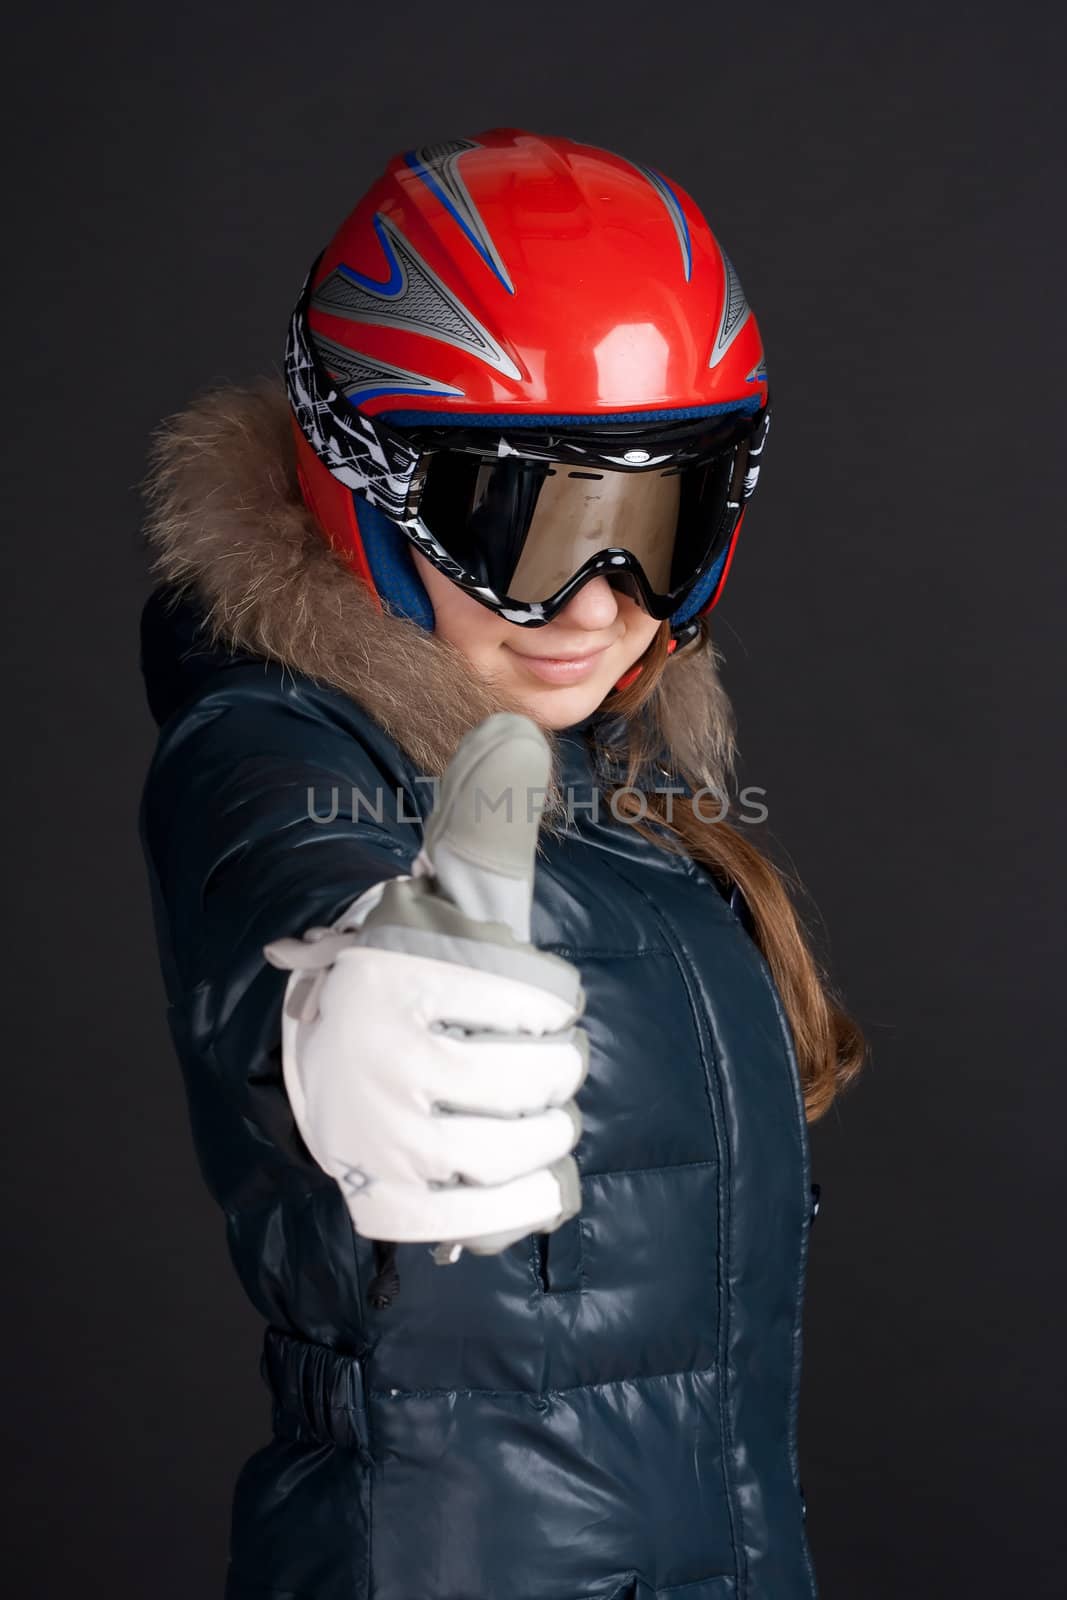 A girl in a ski helmet and goggles raises a big thumbs up